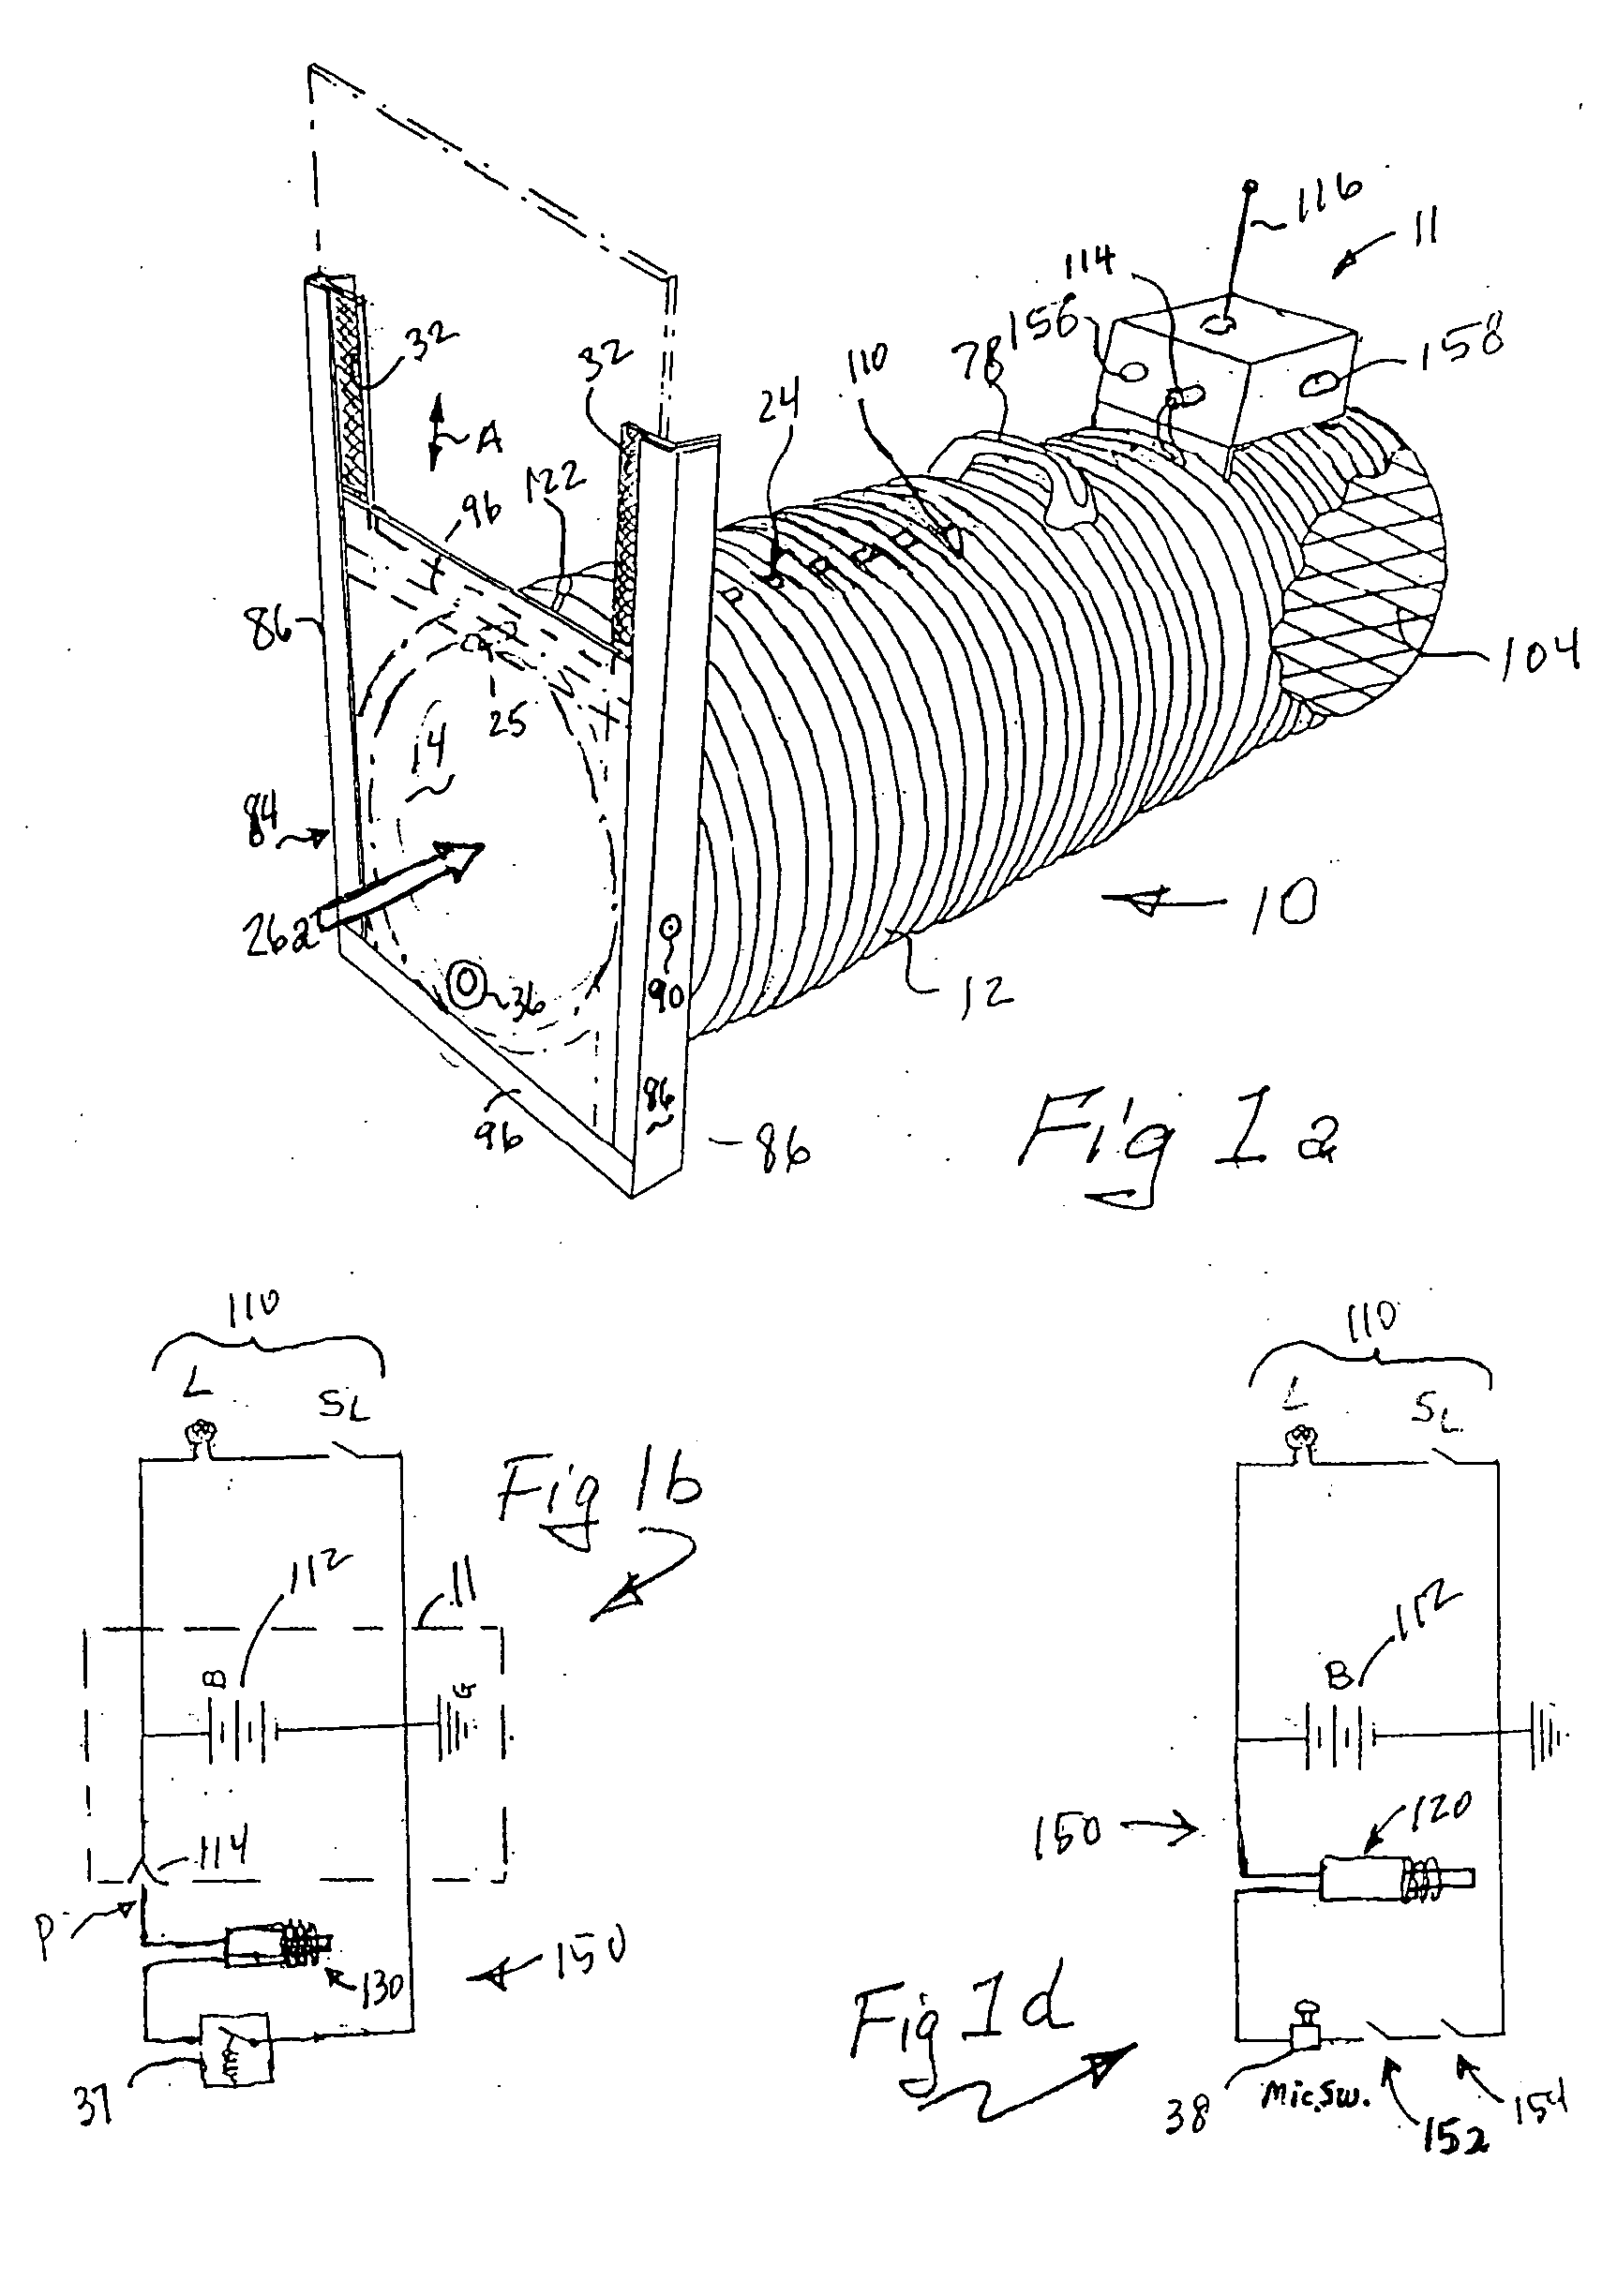 Humane tubular trap, remote trap monitoring system and method and programs for monitoring multiple traps